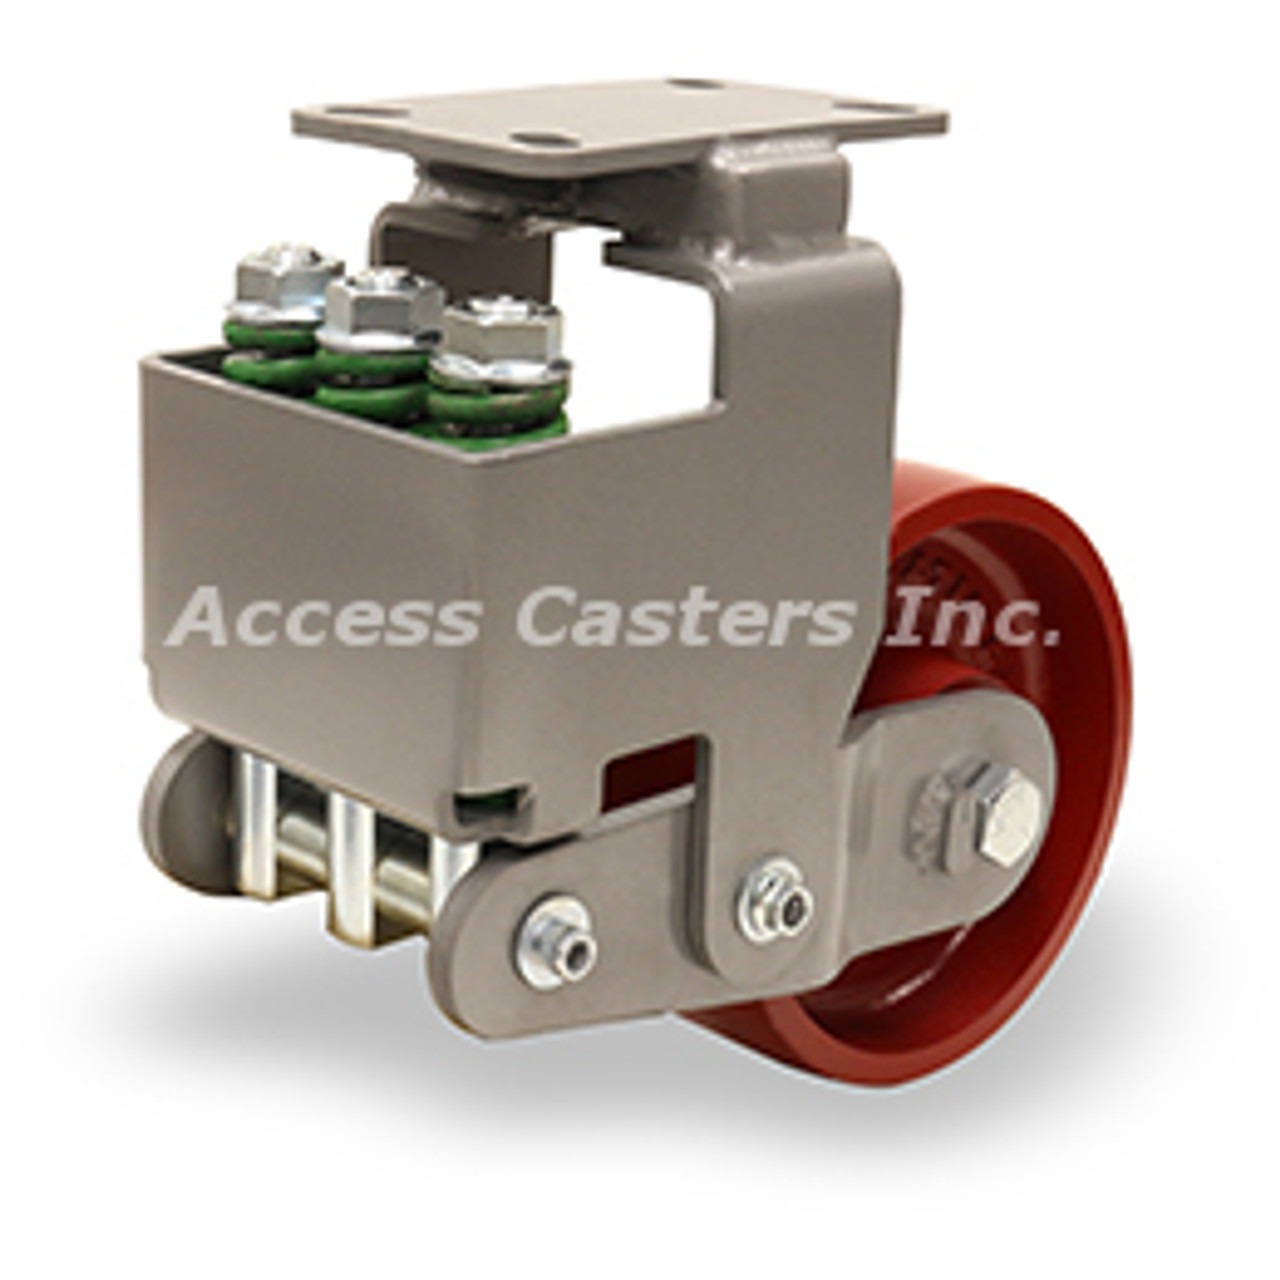 R-AEZFFM-83MB Spring loaded caster with 8" x 3" Metal wheel